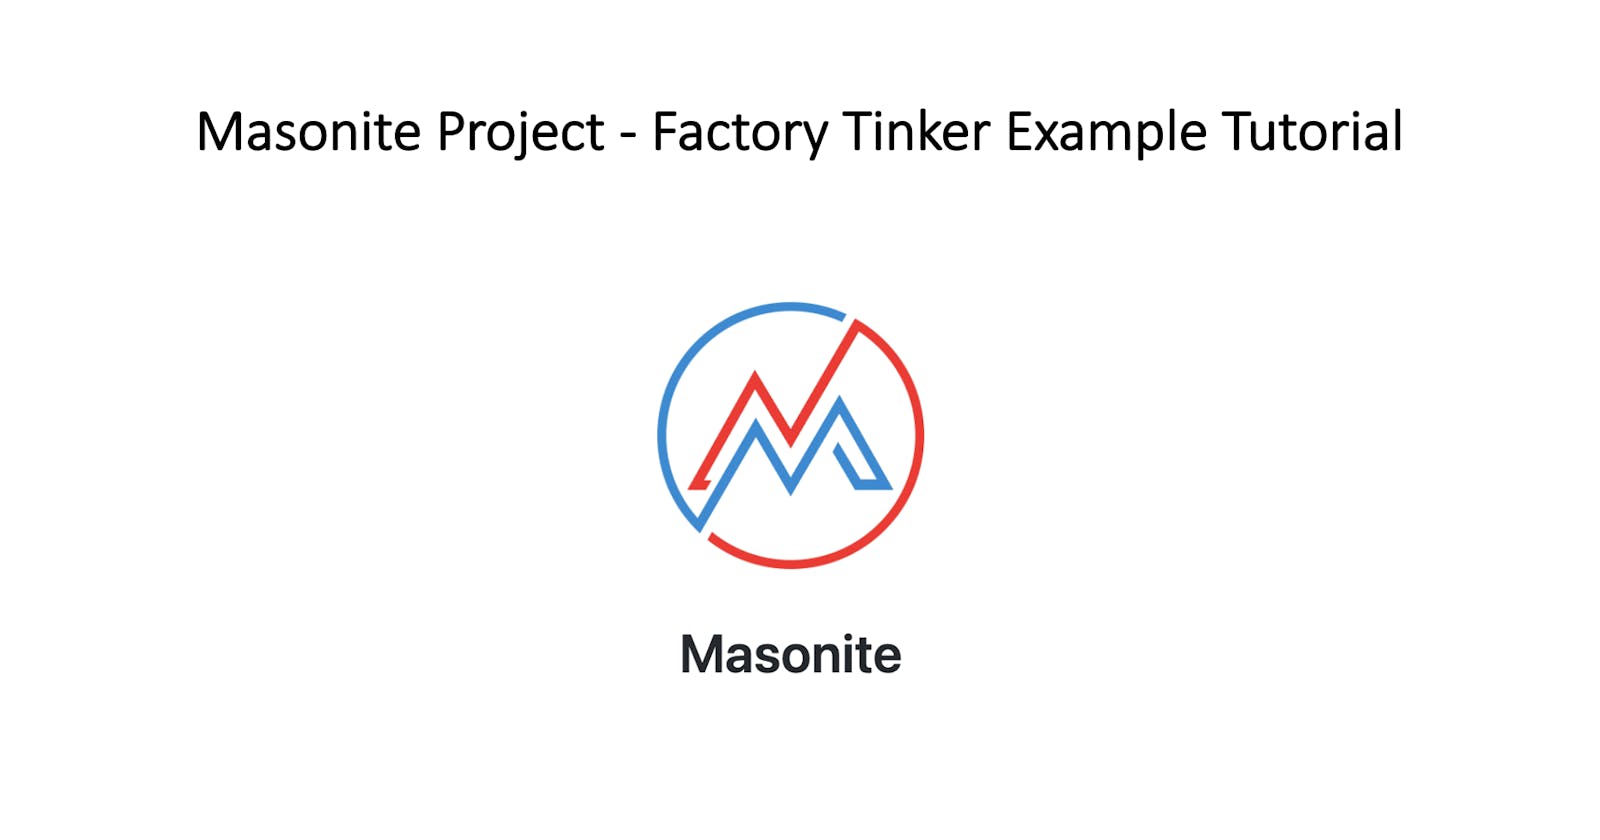 Masonite Project - Factory Tinker Example Tutorial